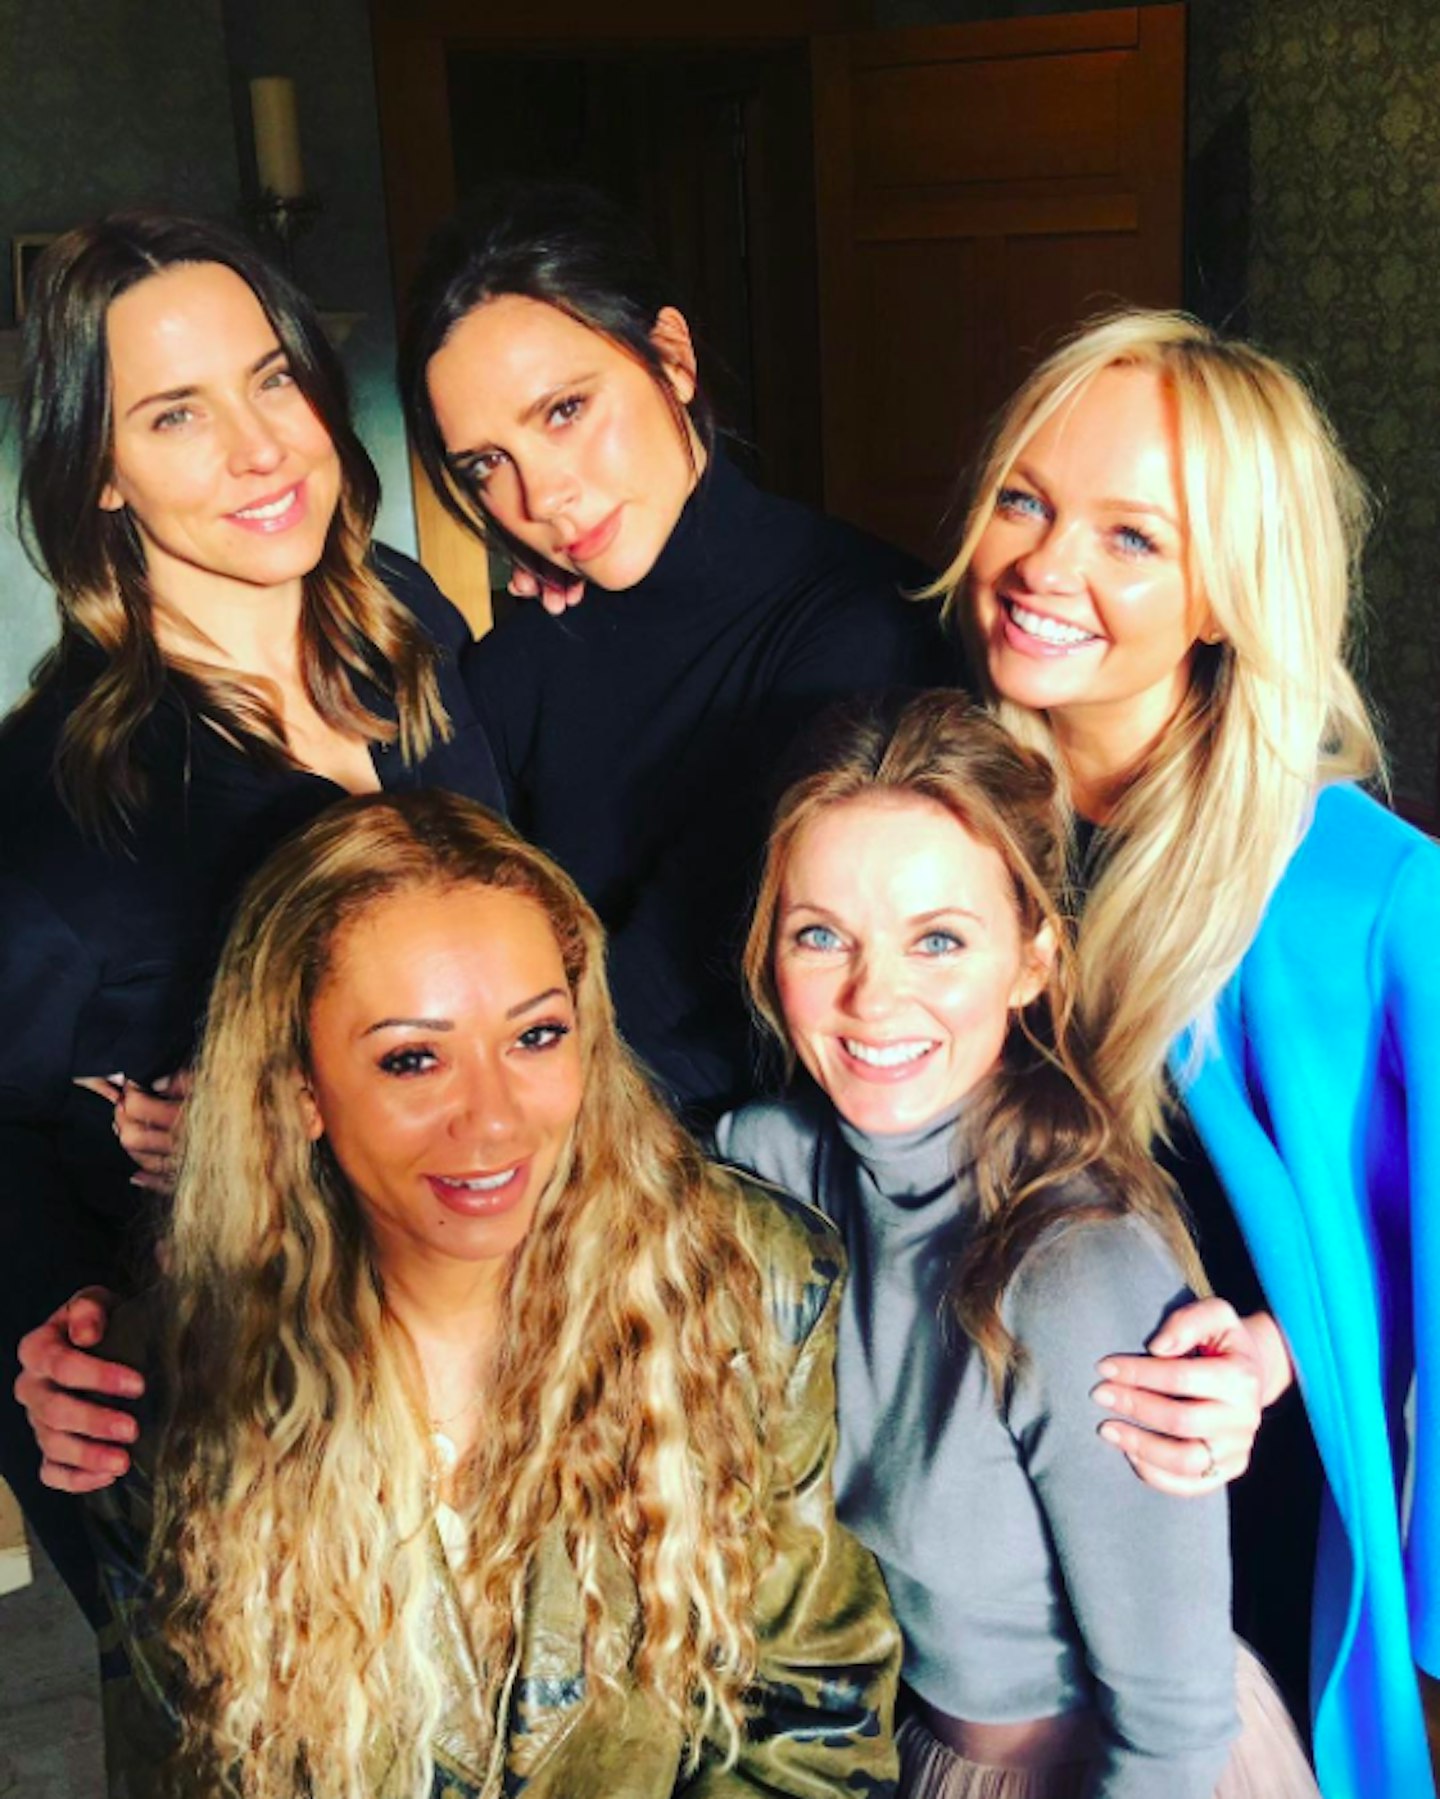 Spice Girls reunited picture